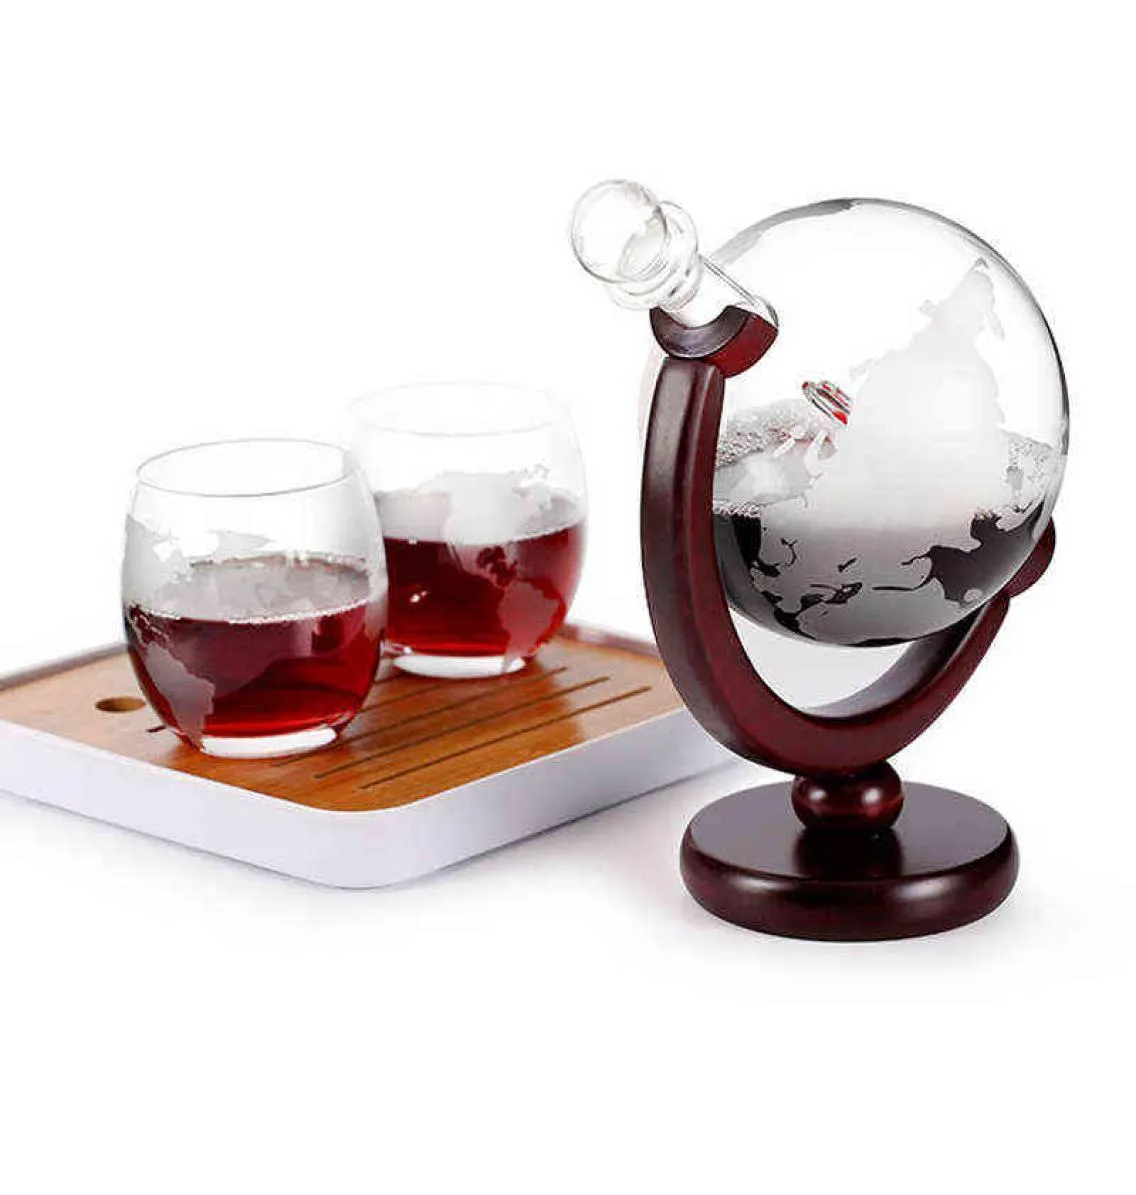 Whiskey Decanter Globe Wine Glass Set Sailboat Skull Inside Crystal Whisky Carafe with Fine Wood Stand Liquor Decanter for Vodka Y7012209